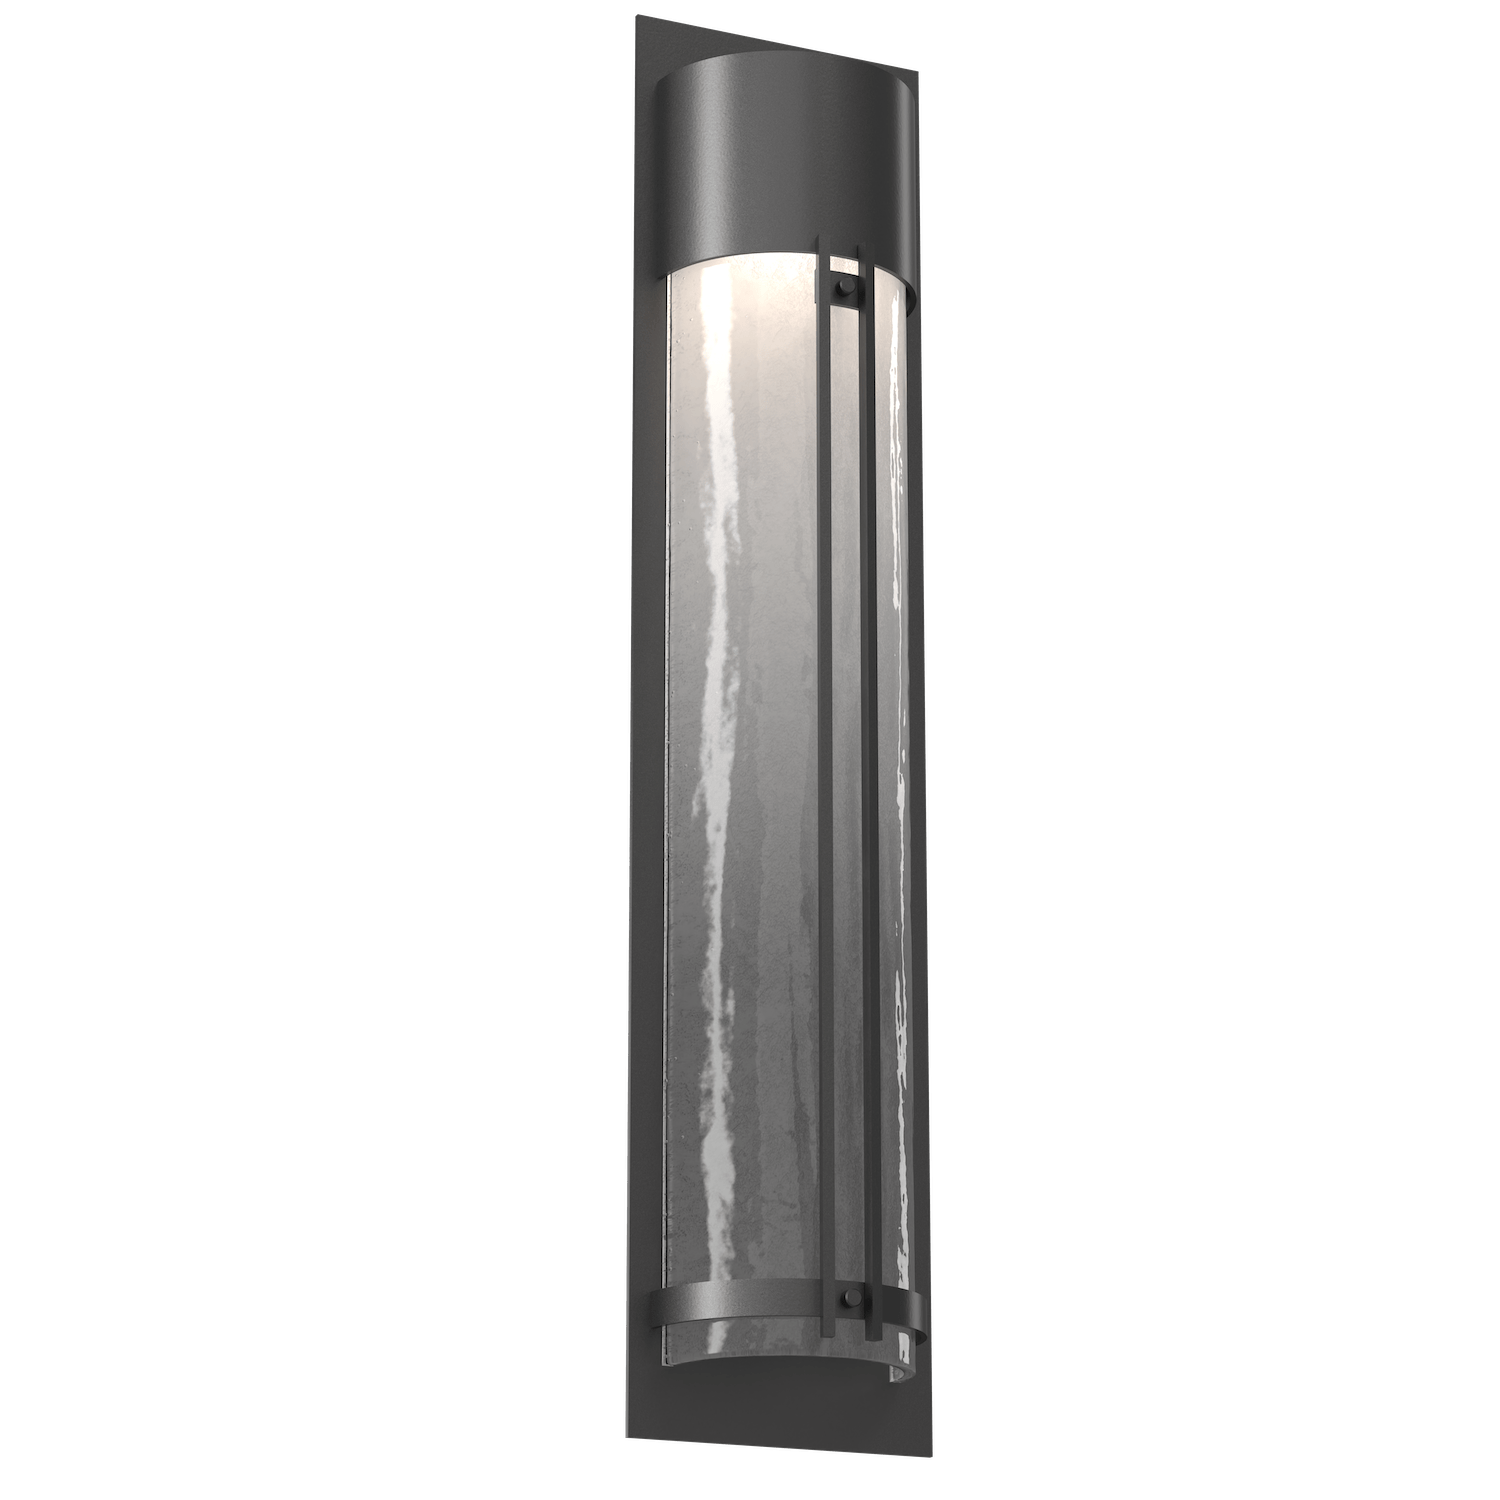 ODB0054-31-AG-FG-Hammerton-Studio-31-inch-outdoor-sconce-with-half-round-frosted-granite-glass-cover-with-argento-grey-finish-and-LED-lamping